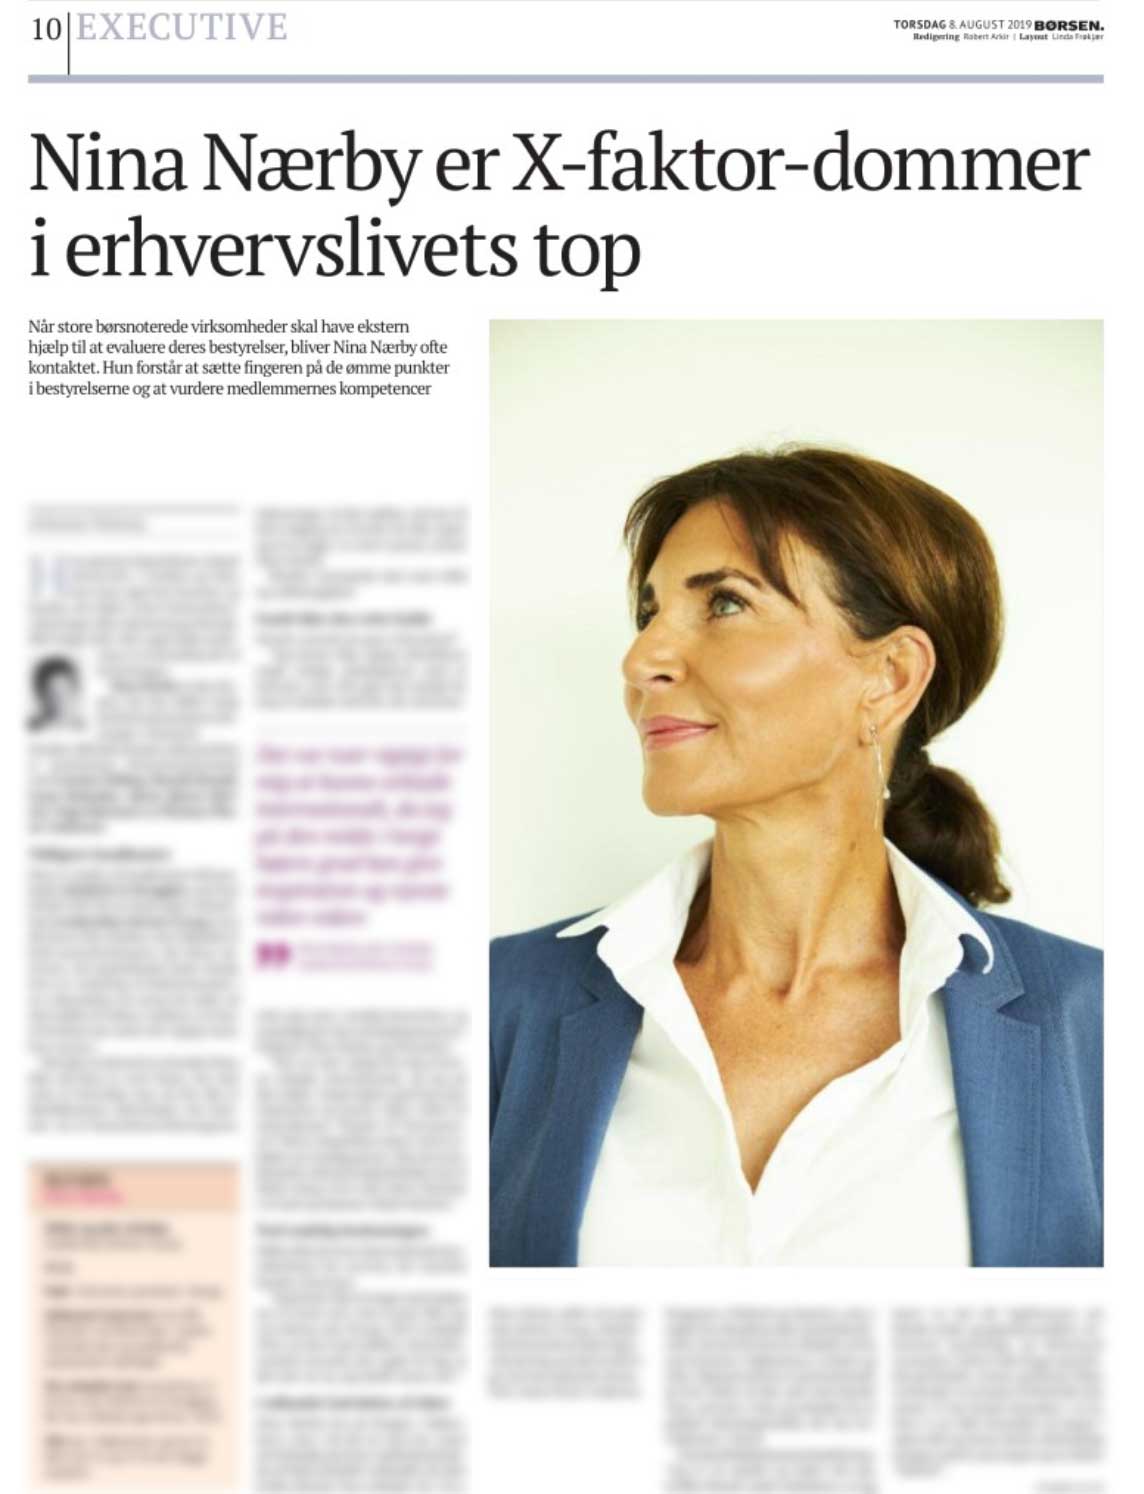 Nina Nærby is the X-factor judge of the top of the senior executives and non-executives